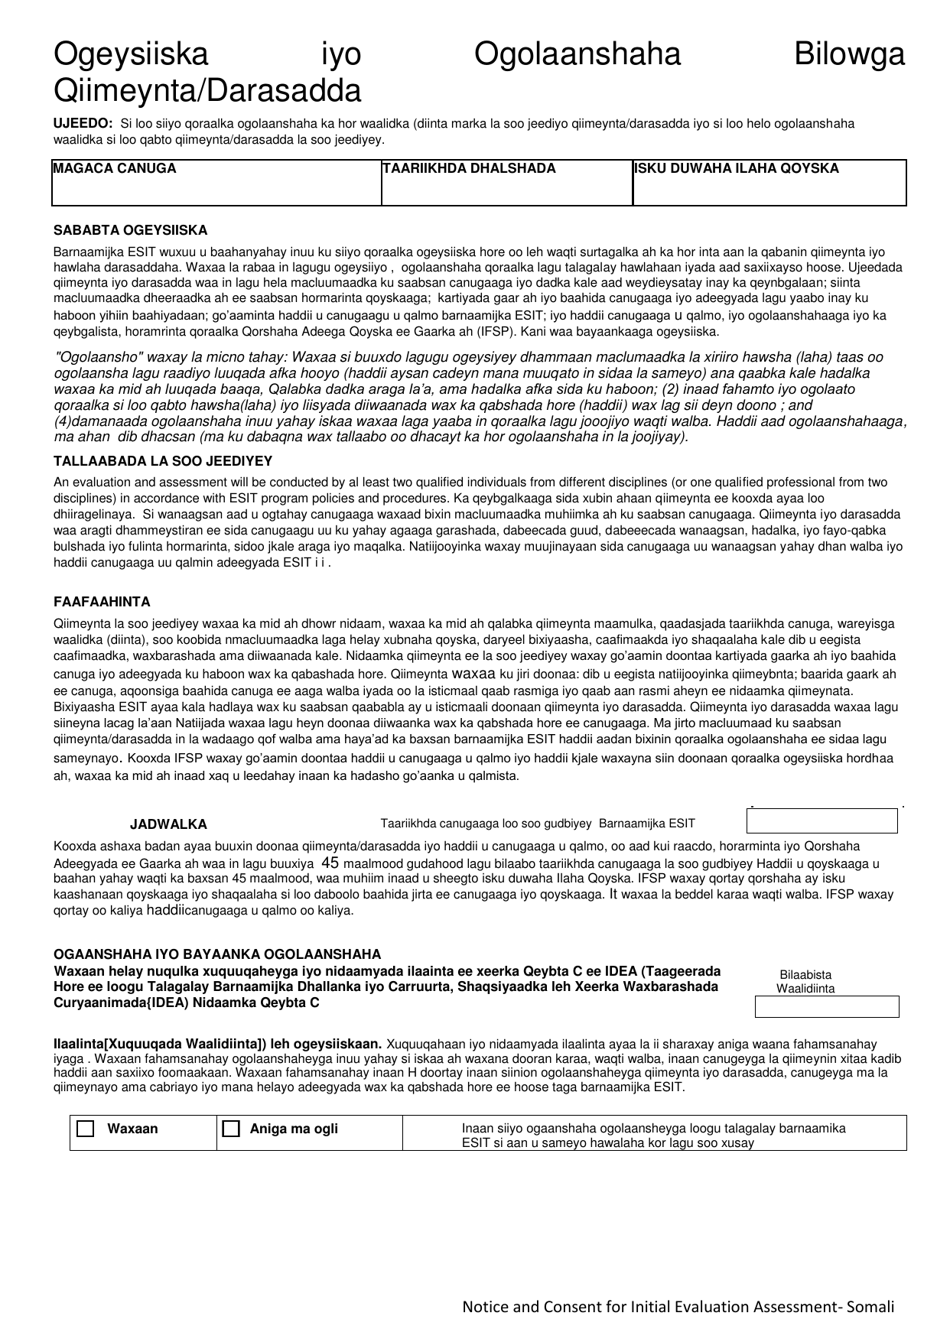 DCYF Form 15-056 Notice of Consent for Initial Evaluation Assessment - Washington (Somali), Page 1